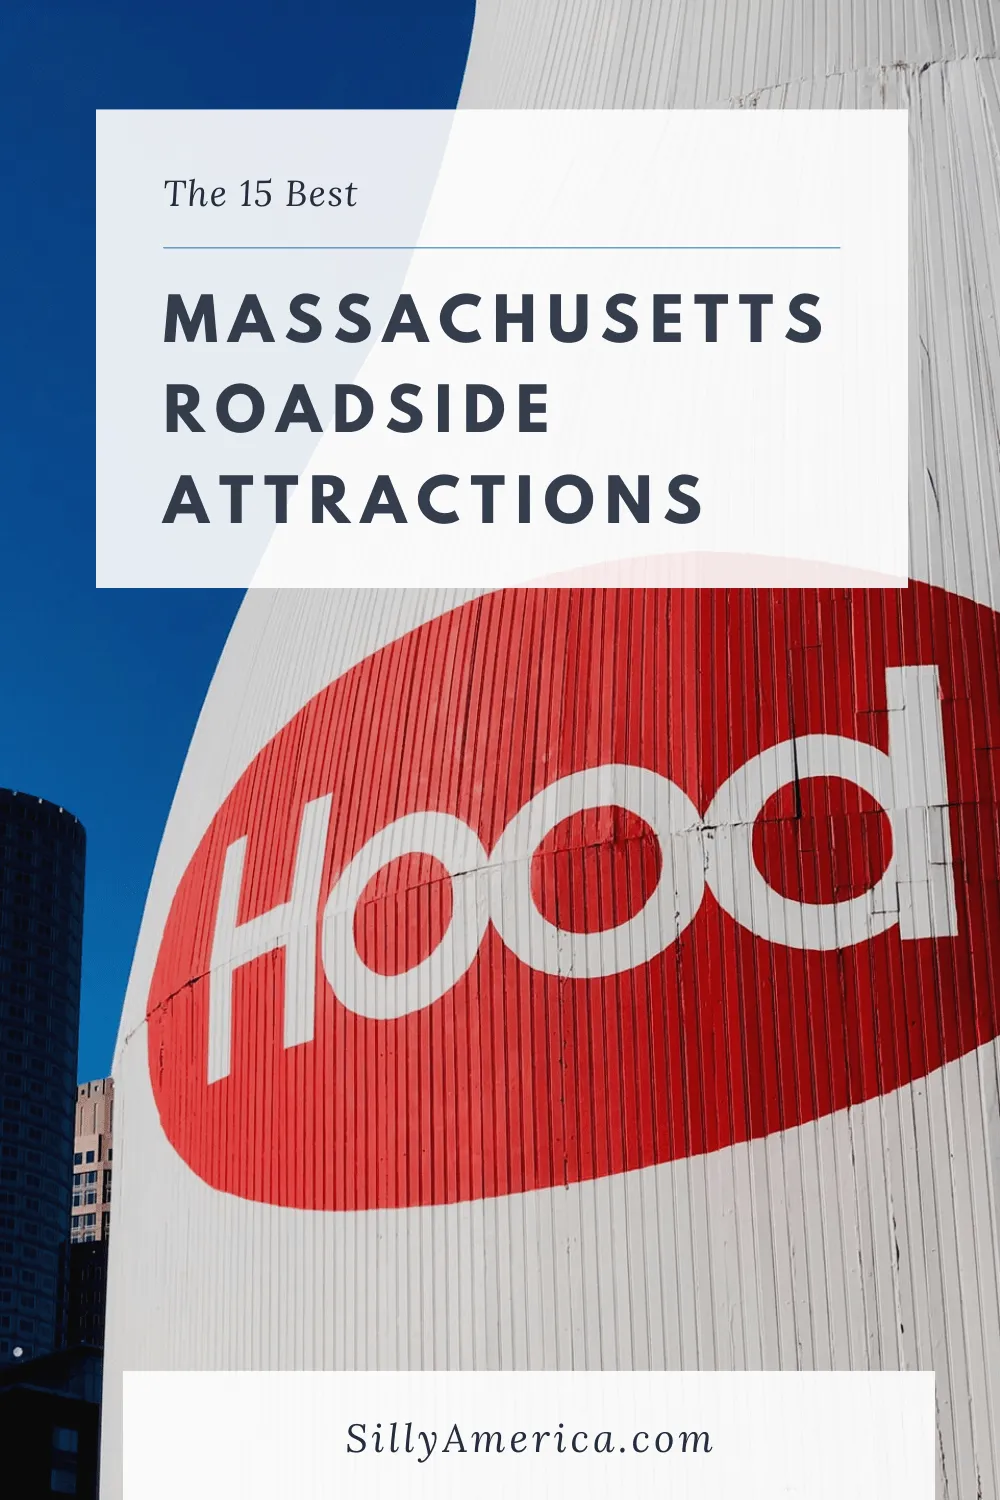 The best Massachusetts roadside attractions to visit on a Massachusetts road trip. Add these roadside oddities to your travel bucket list or itinerary! Weird roadside attractions and fun road trip stops for kids or adults! #MassachusettsRoadsideAttractions #MassachusettsRoadsideAttraction #RoadsideAttractions #RoadsideAttraction #RoadTrip #MassachusettsRoadTrip #MassachusettsRoadTripBucketLists #MassachusettsBucketList #MassachusettsRoadTripTravel #BostonRoadTrip #WeirdRoadsideAttractions